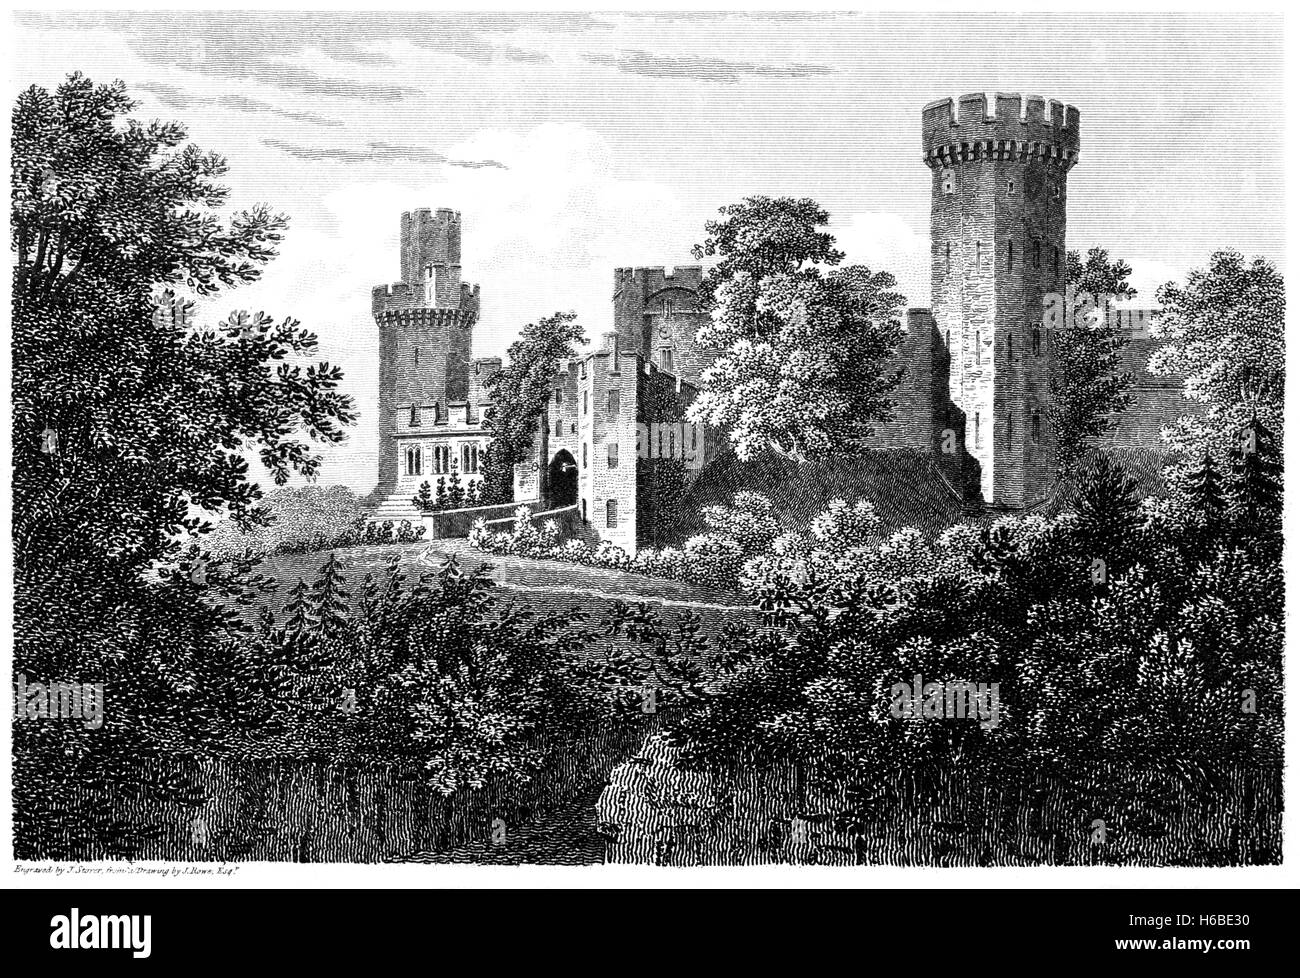 An engraving of Warwick Castle scanned at high resolution from a book printed in 1812. Believed copyright free. Stock Photo